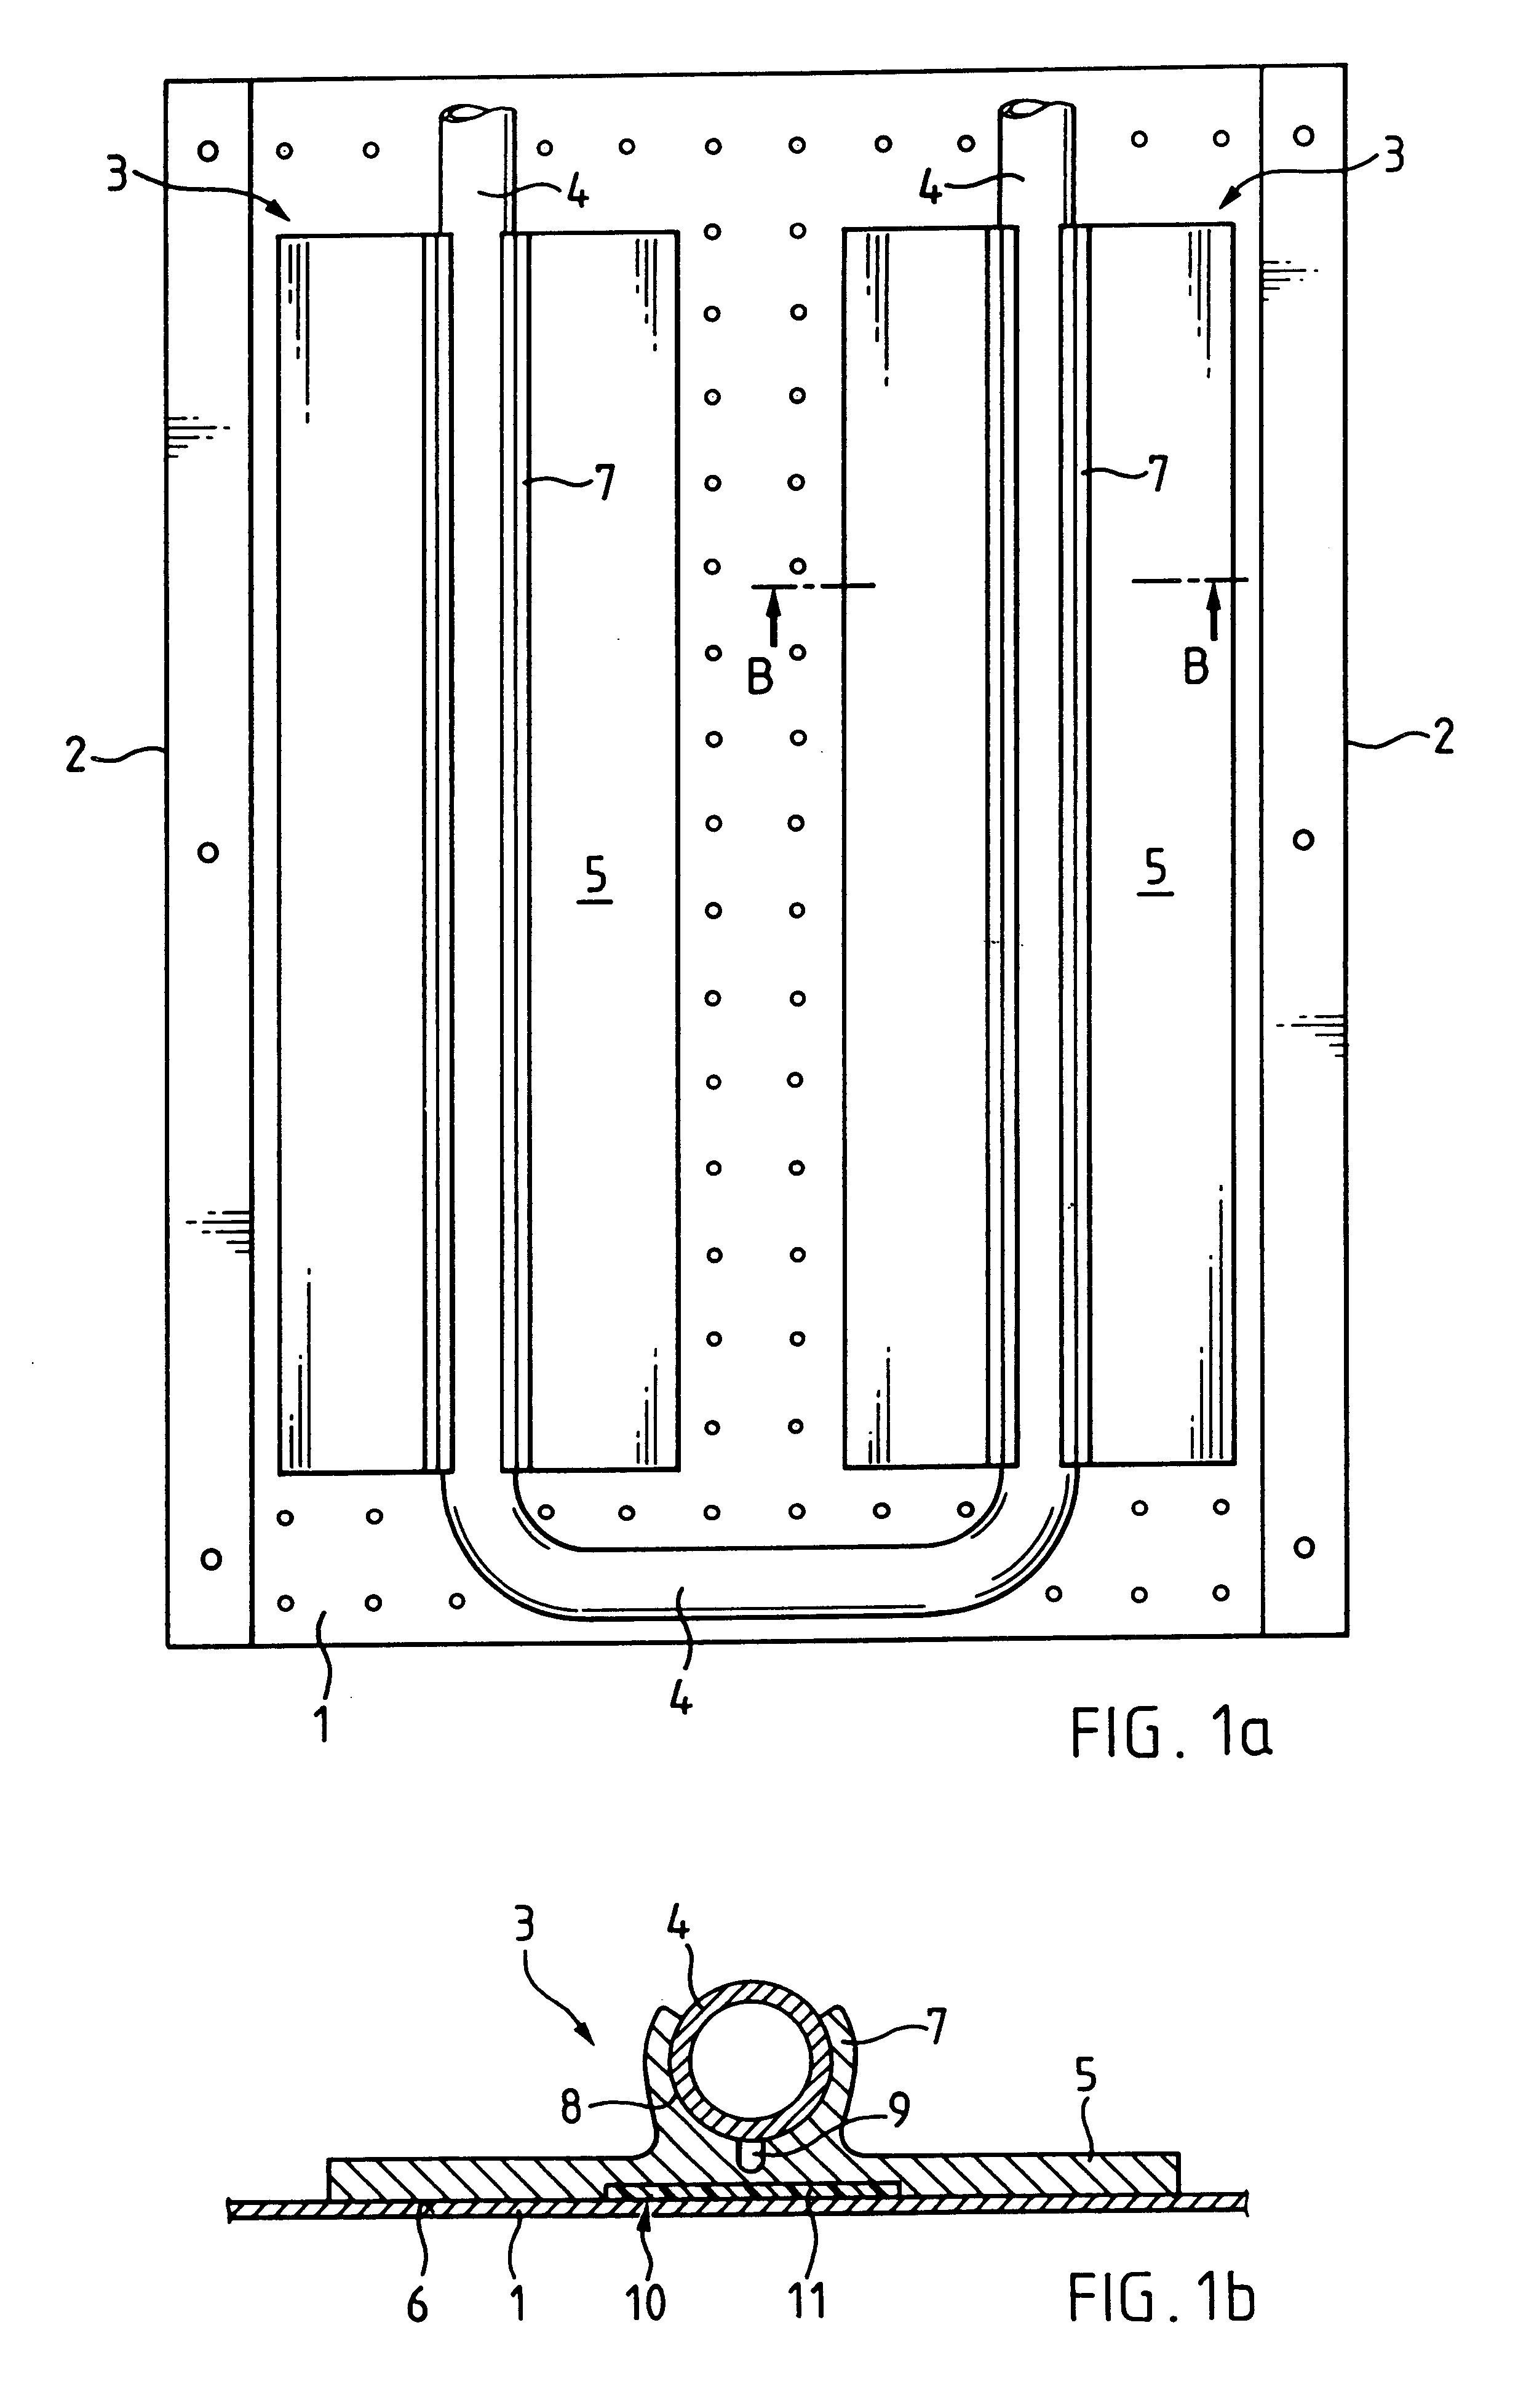 Contact element and ceiling element for a heating and cooling ceiling